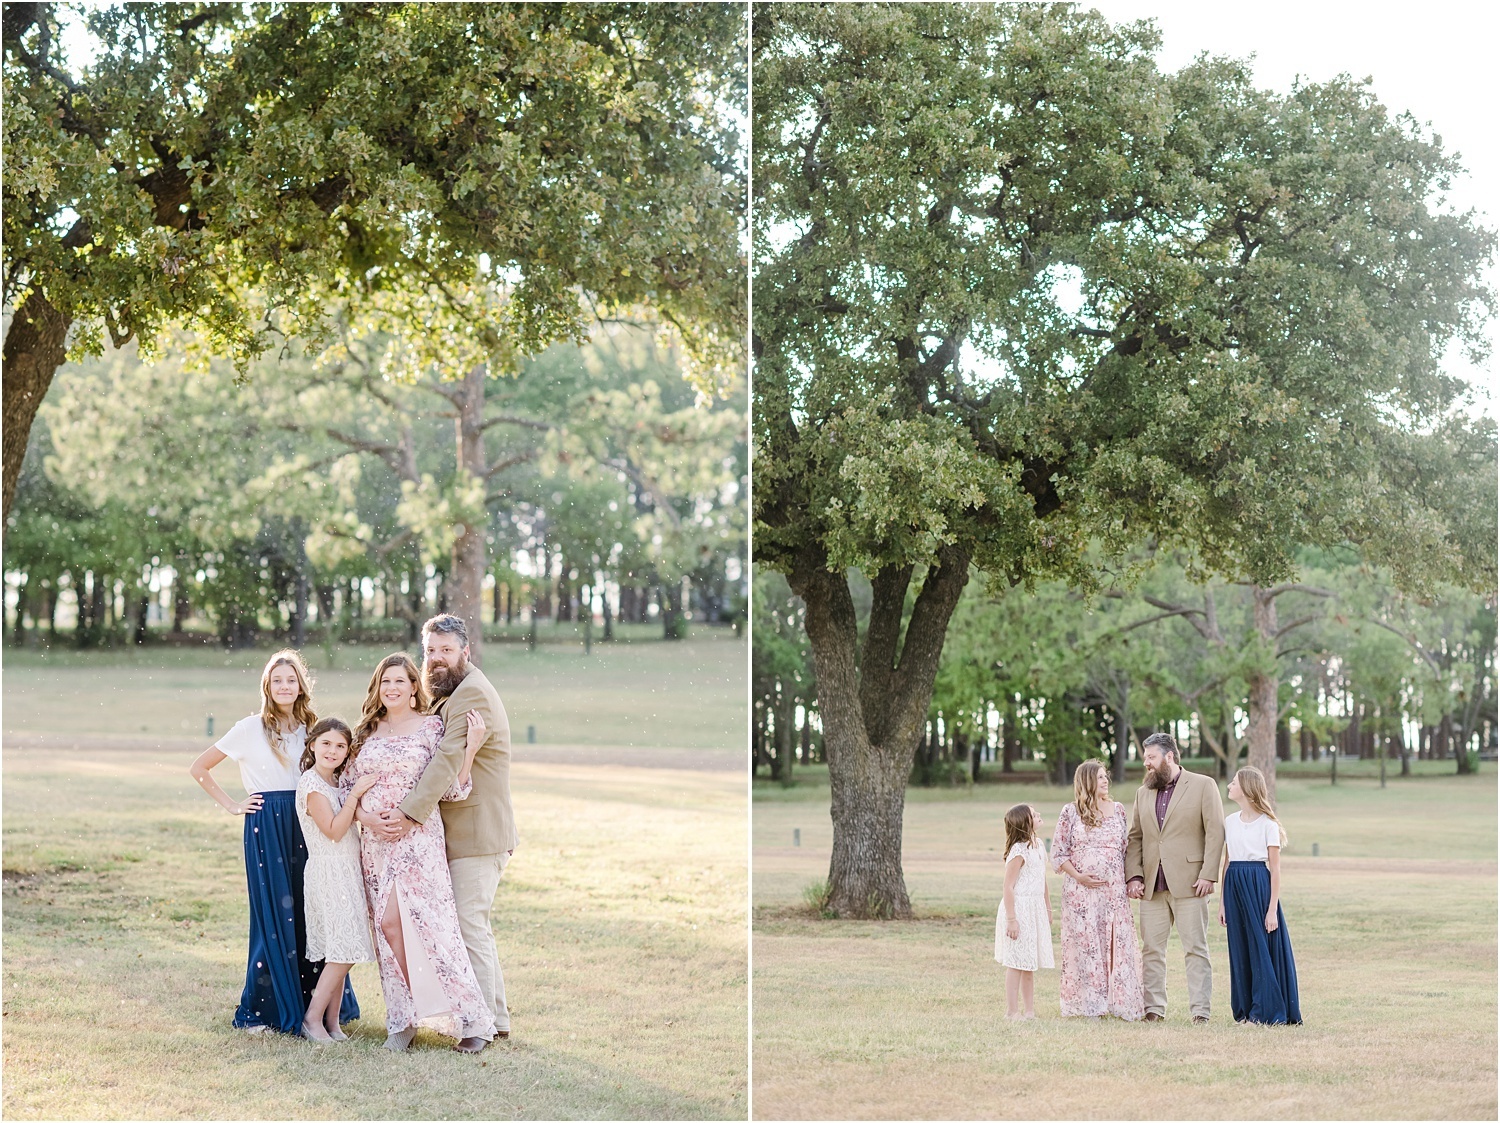 Taylor-Family-and-Maternity-Portraits-at-Lake-Park-in-Lewisville-Texas_0031